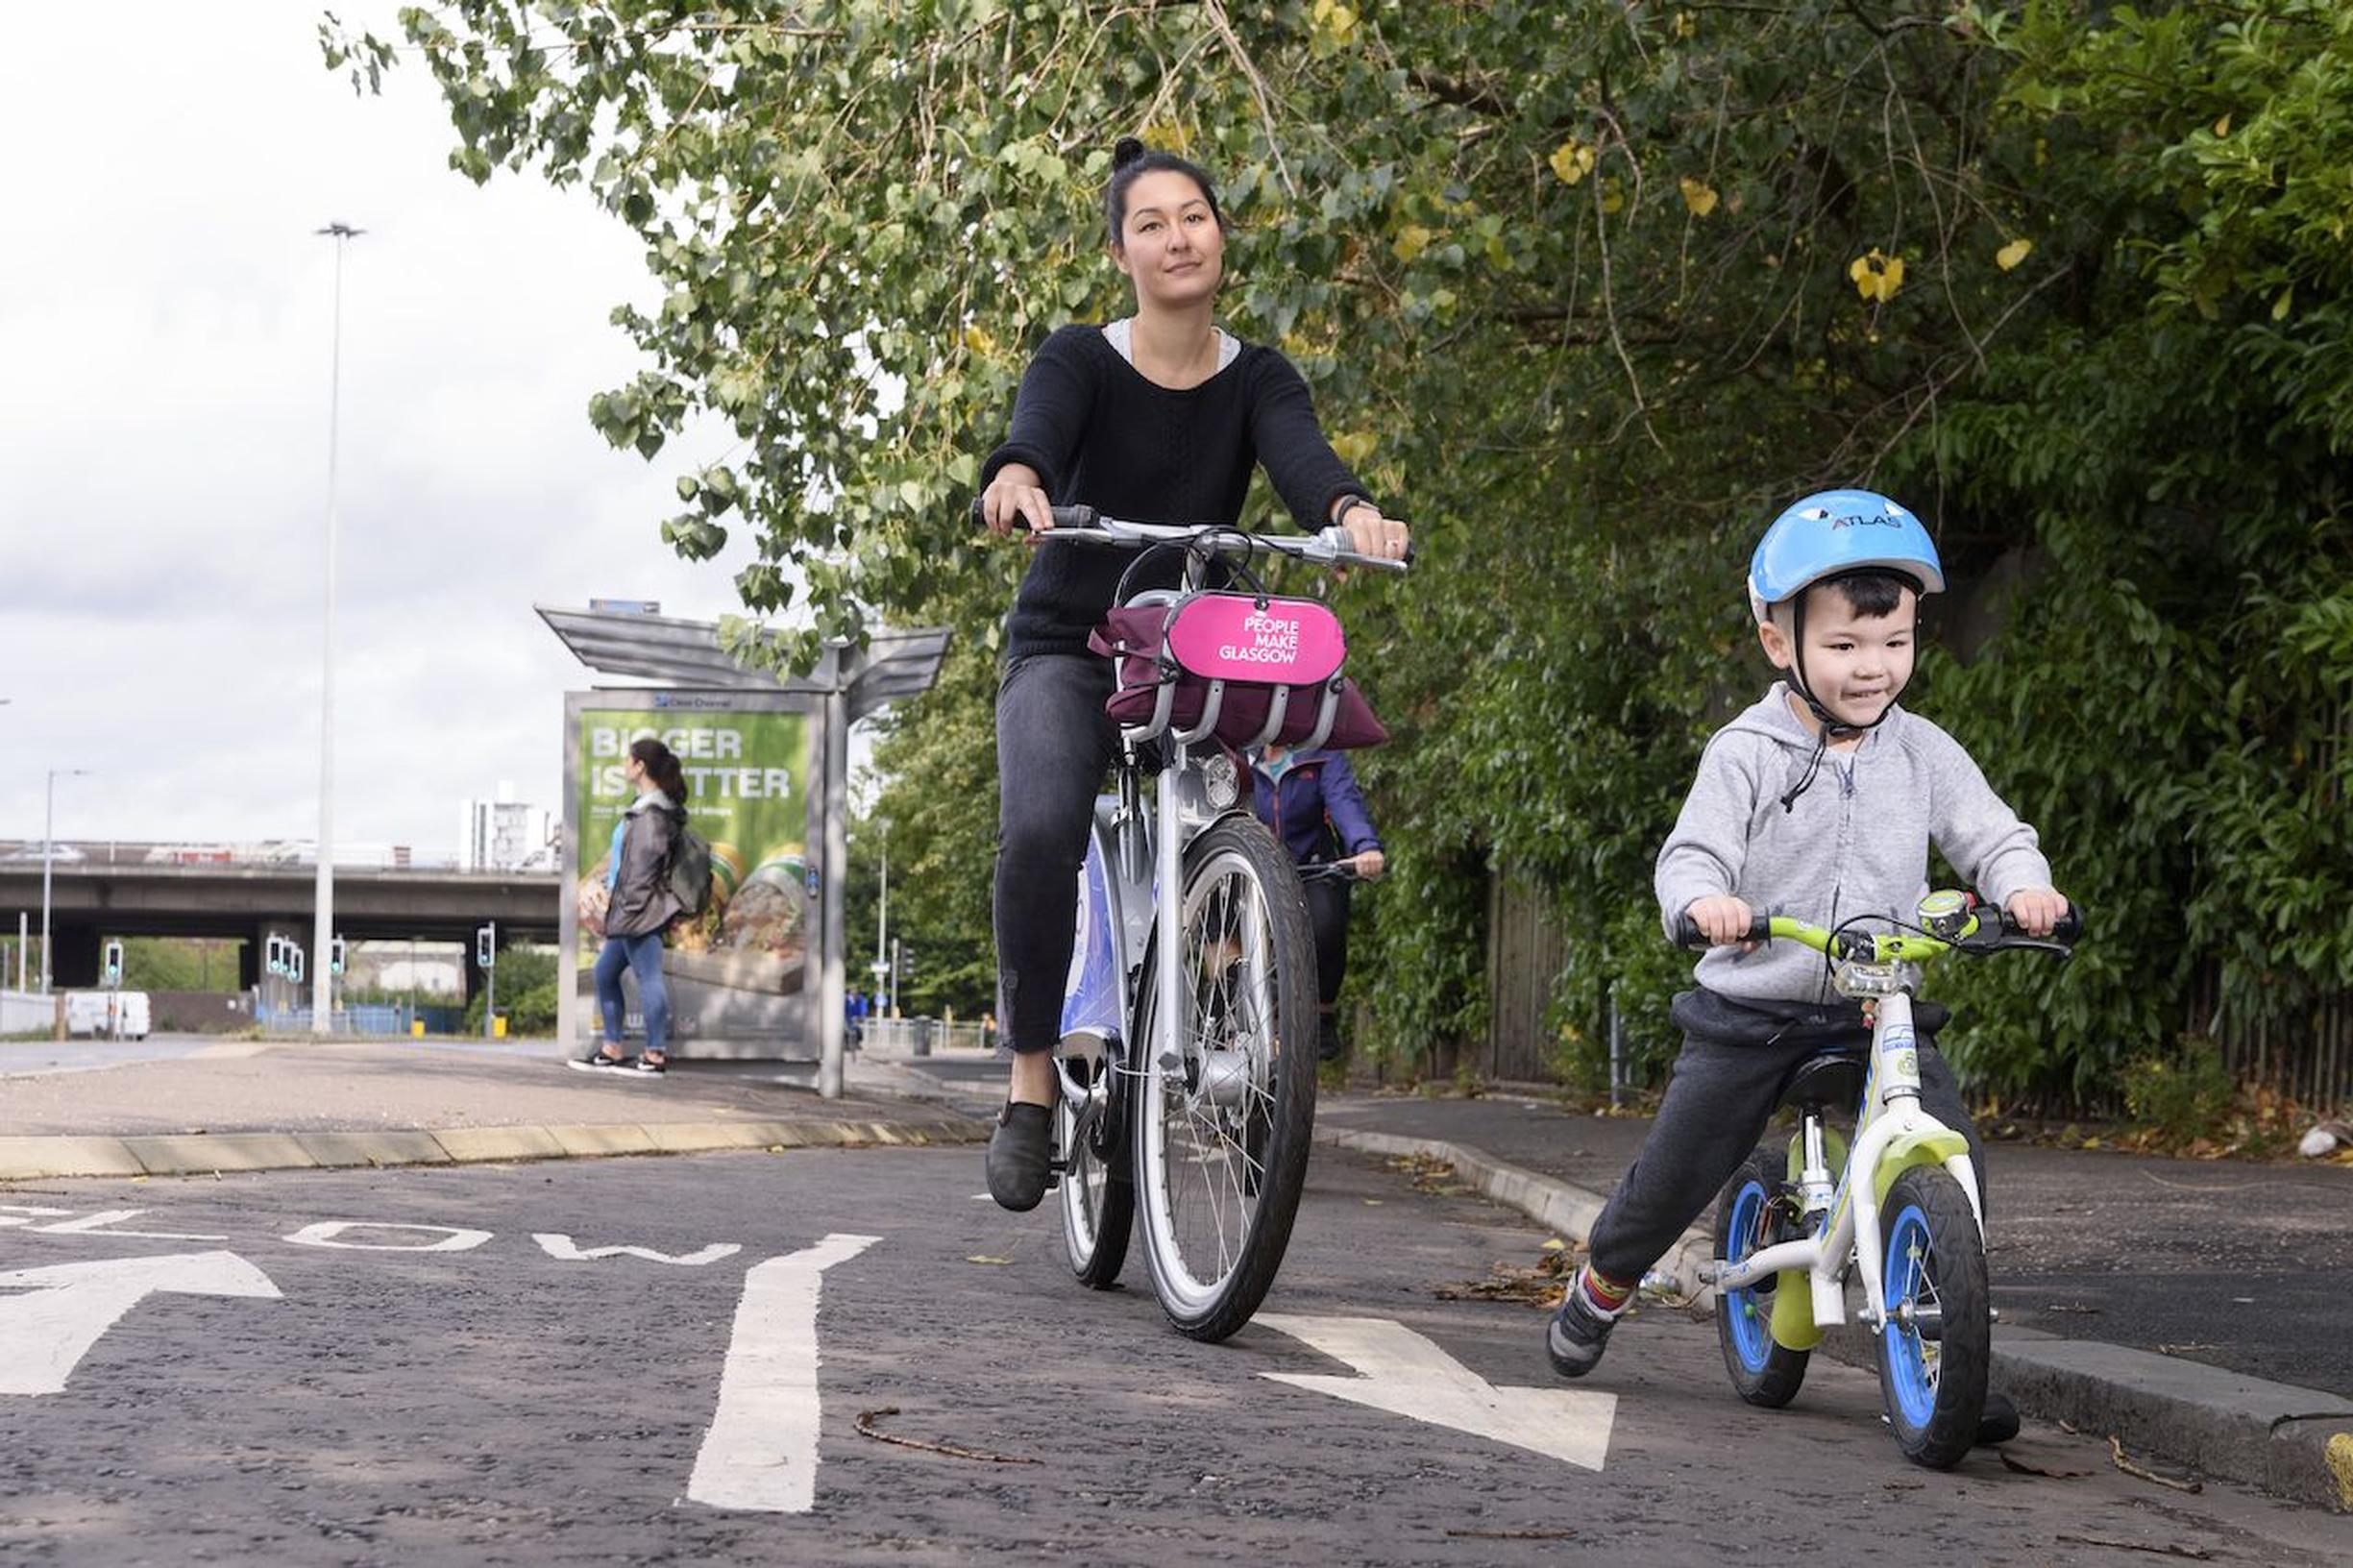 A new cycling route in Glasgow